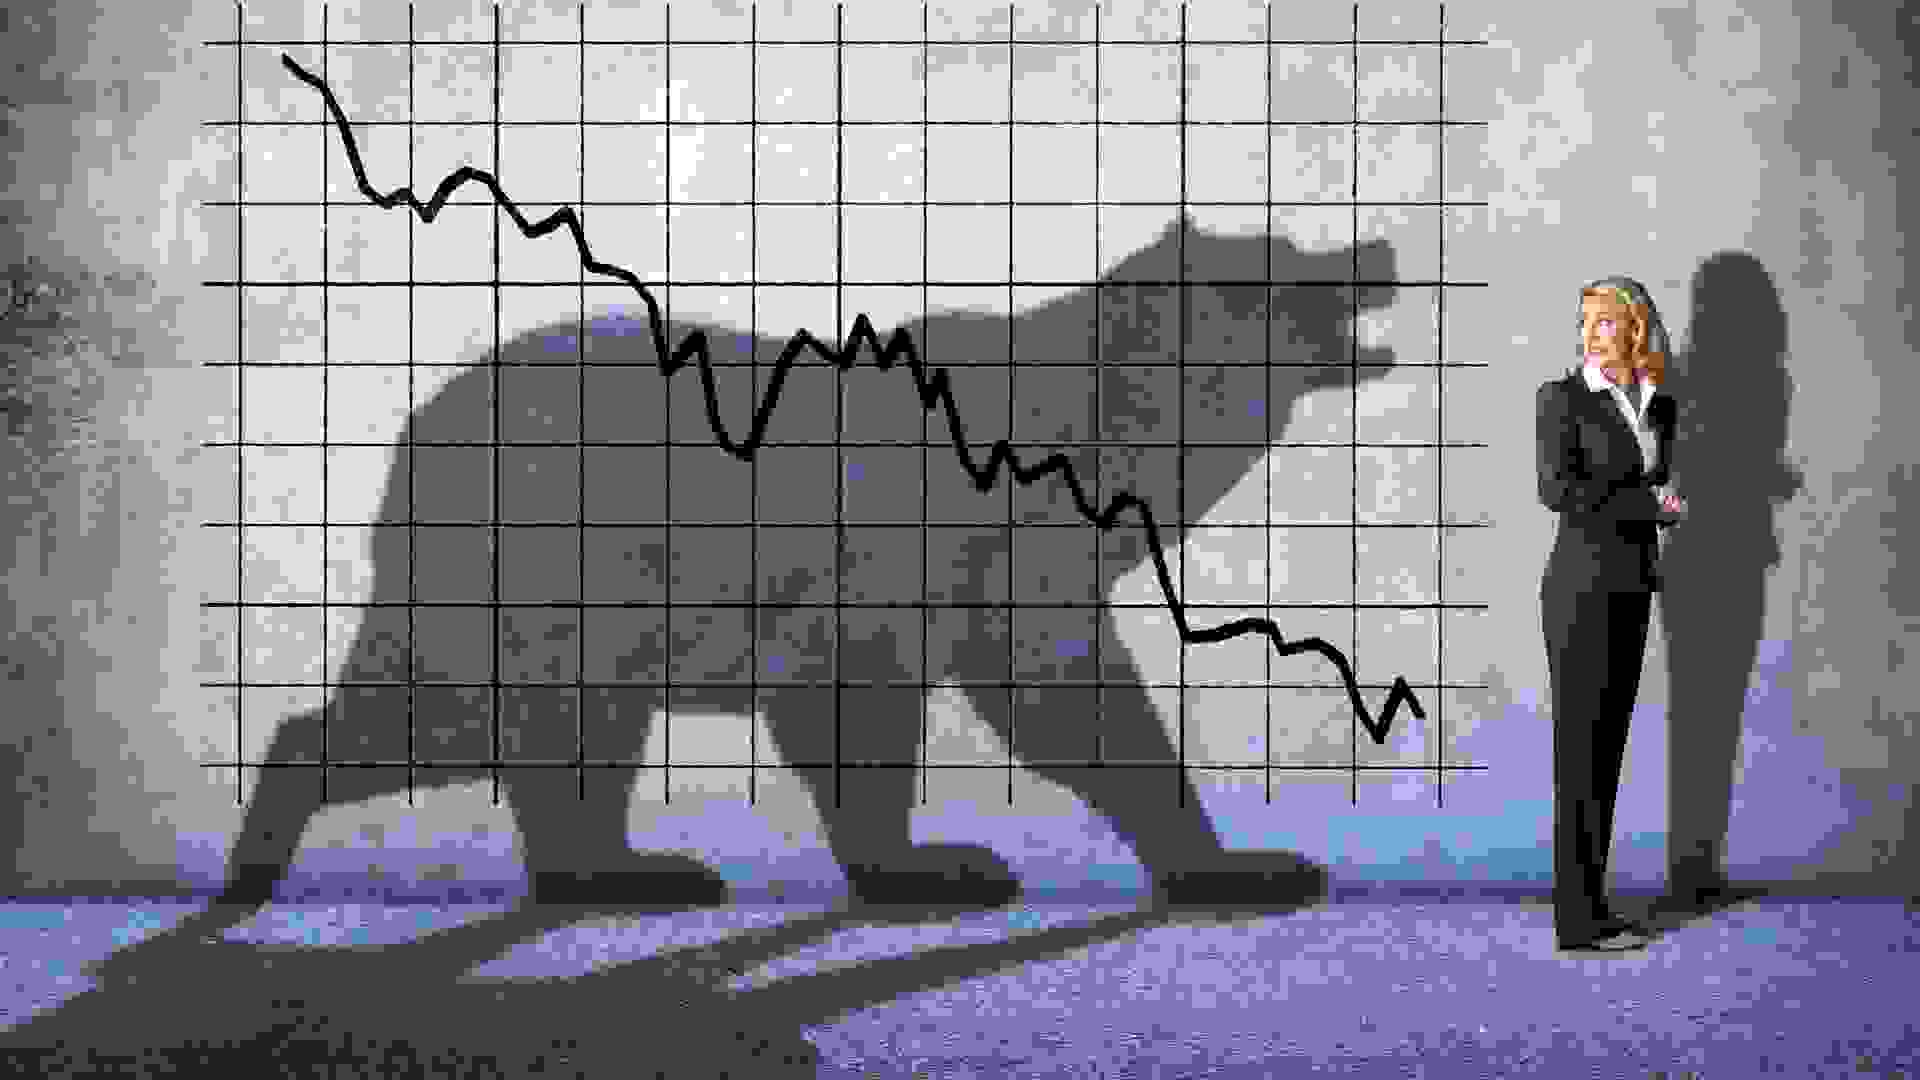 A businesswoman looks over her shoulder with concern at  a descending stock chart and an ominous shadow of a bear that is cast on the wall above her.